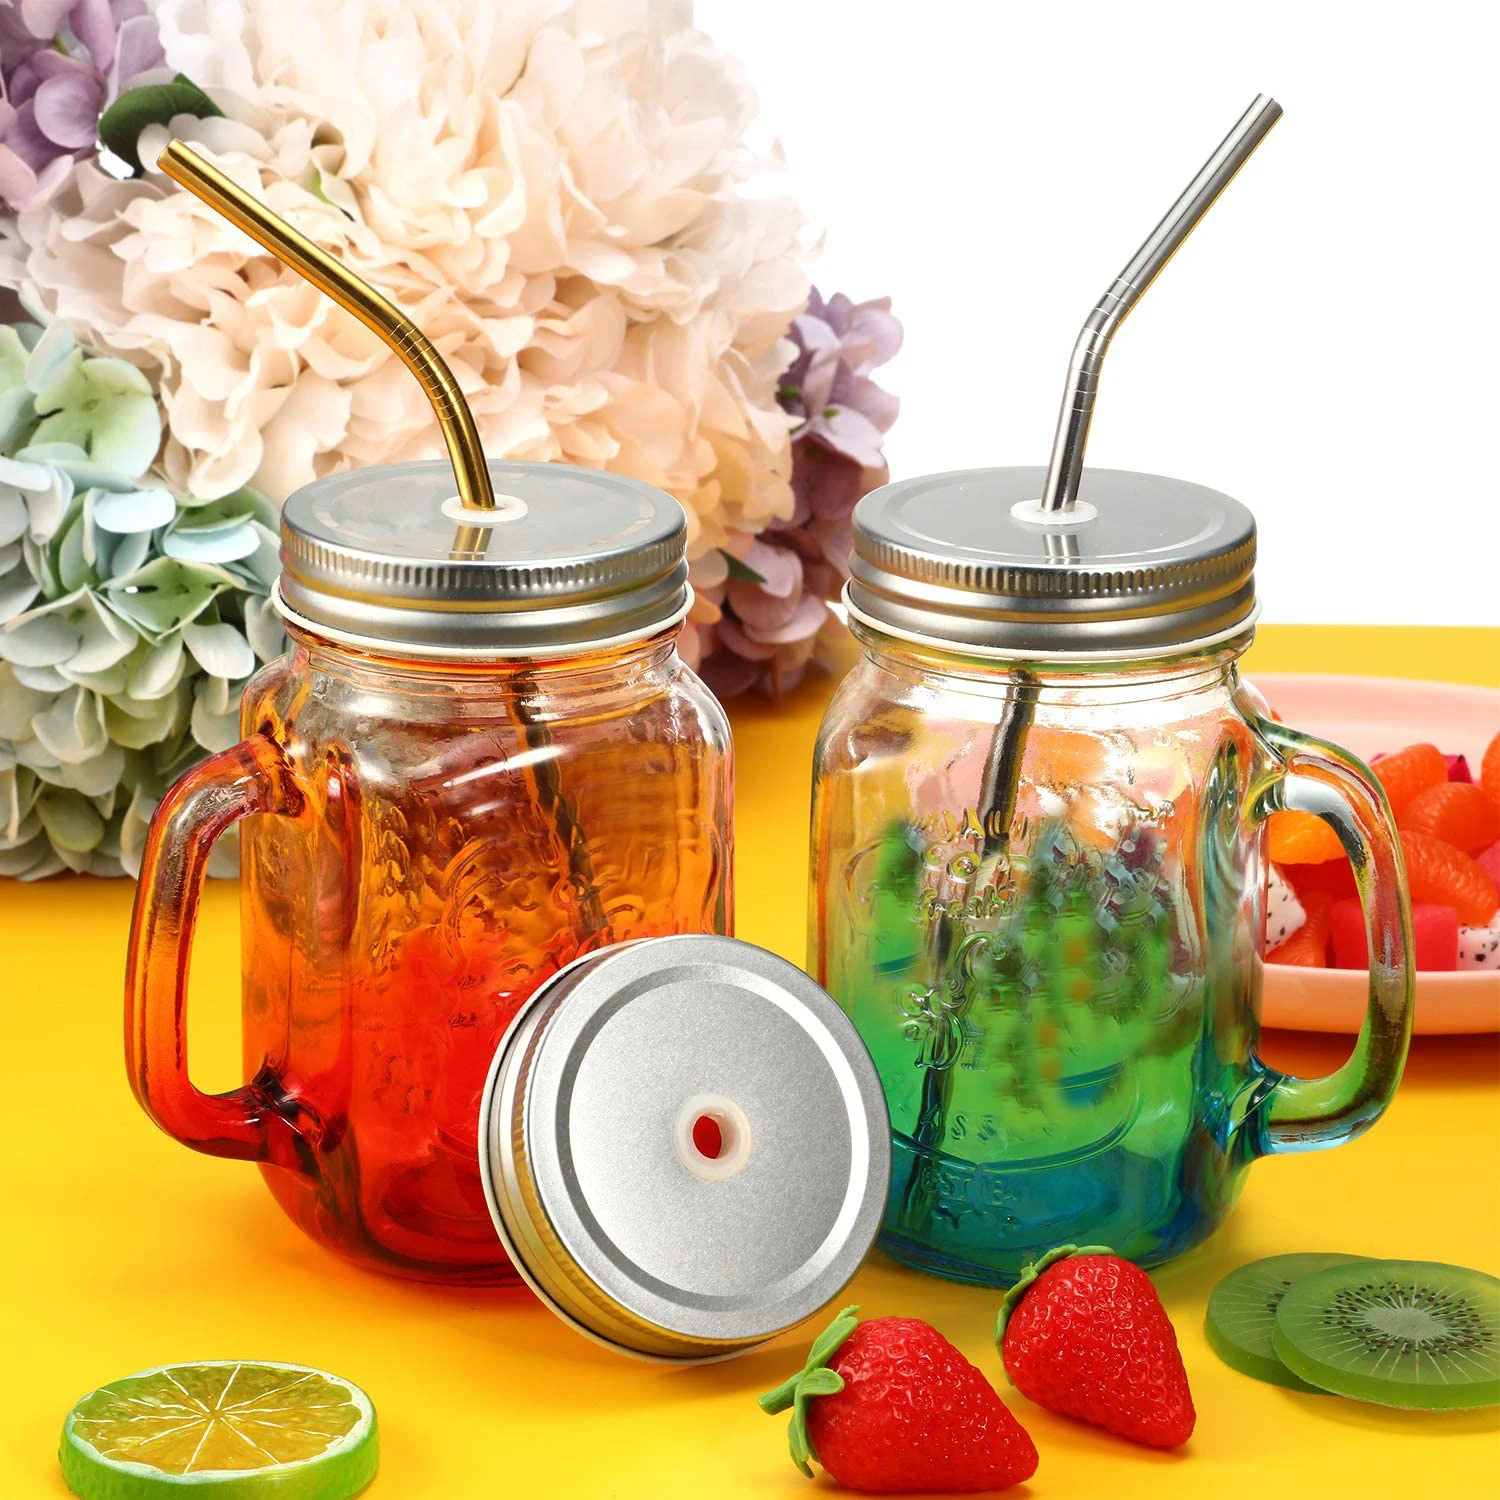 https://ae01.alicdn.com/kf/H148a9eee24714aab9e0d718e1ab7837aQ/650ML-Mason-Jar-Mugs-with-Handle-Regular-Mouth-sliver-Lids-with-Reusable-Stainless-Steel-Straw.jpg